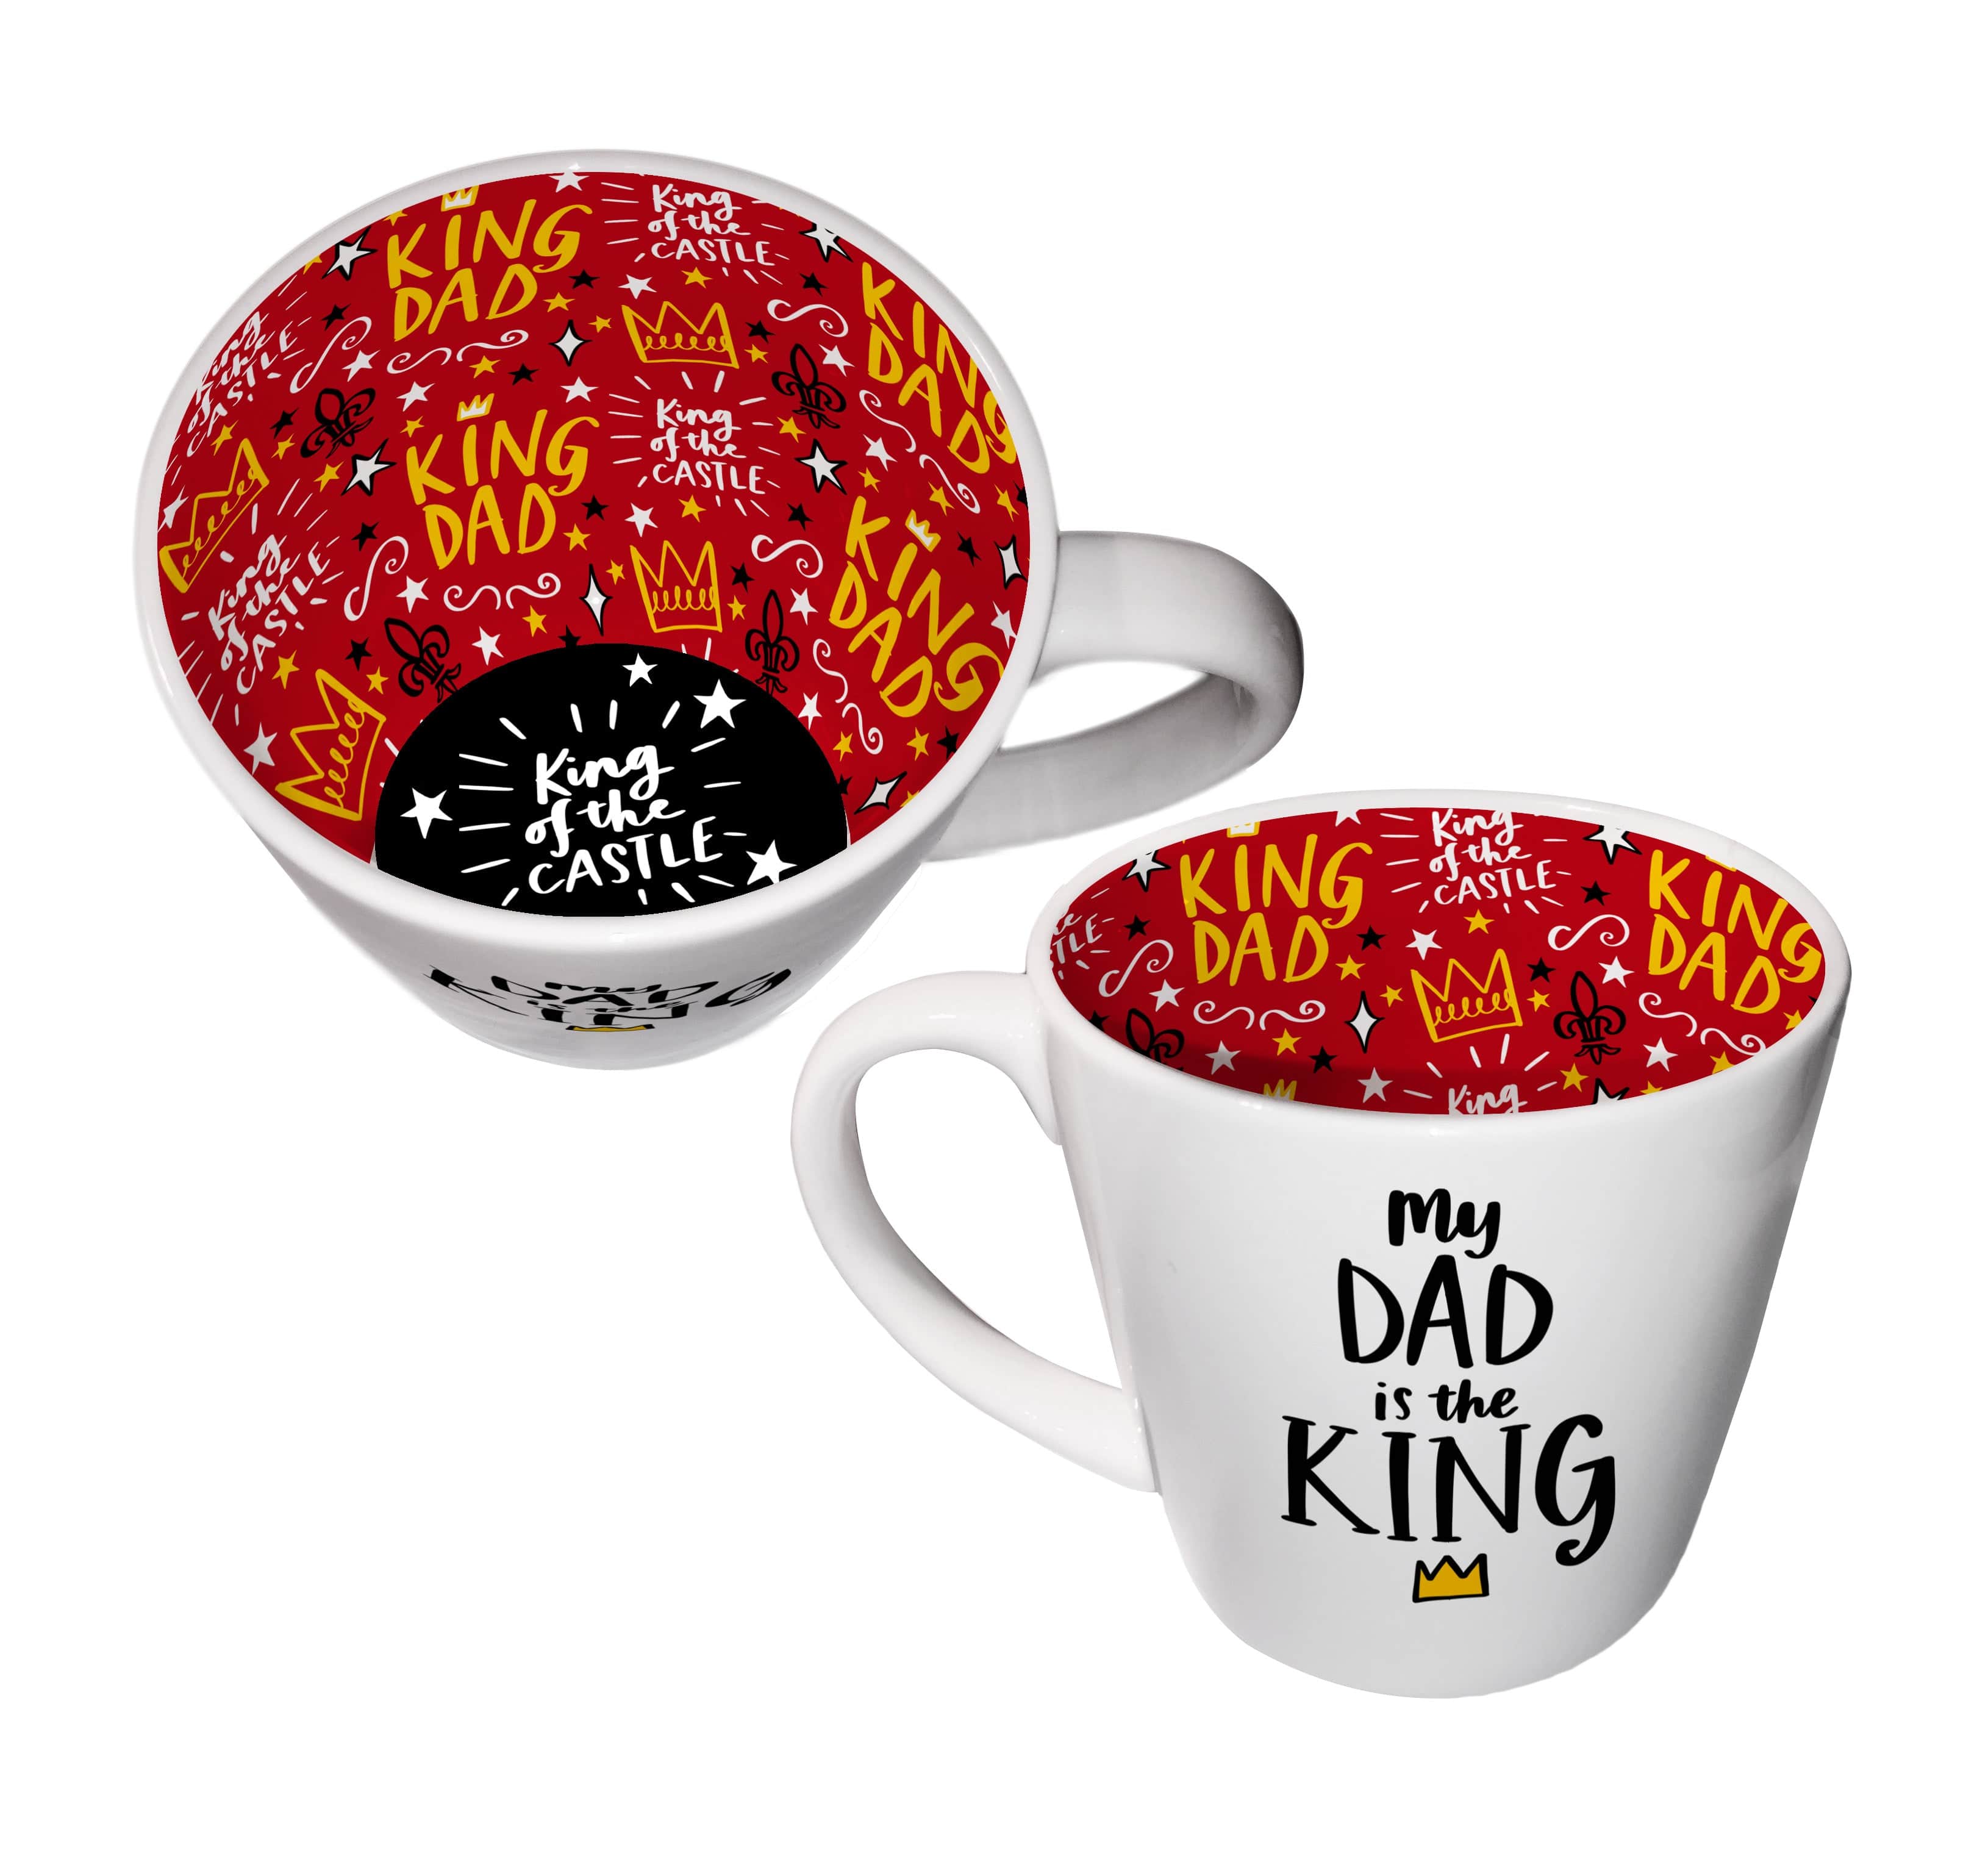 WPL Gifts Mug Inside Out Mug With Gift Box - My Dad is the King